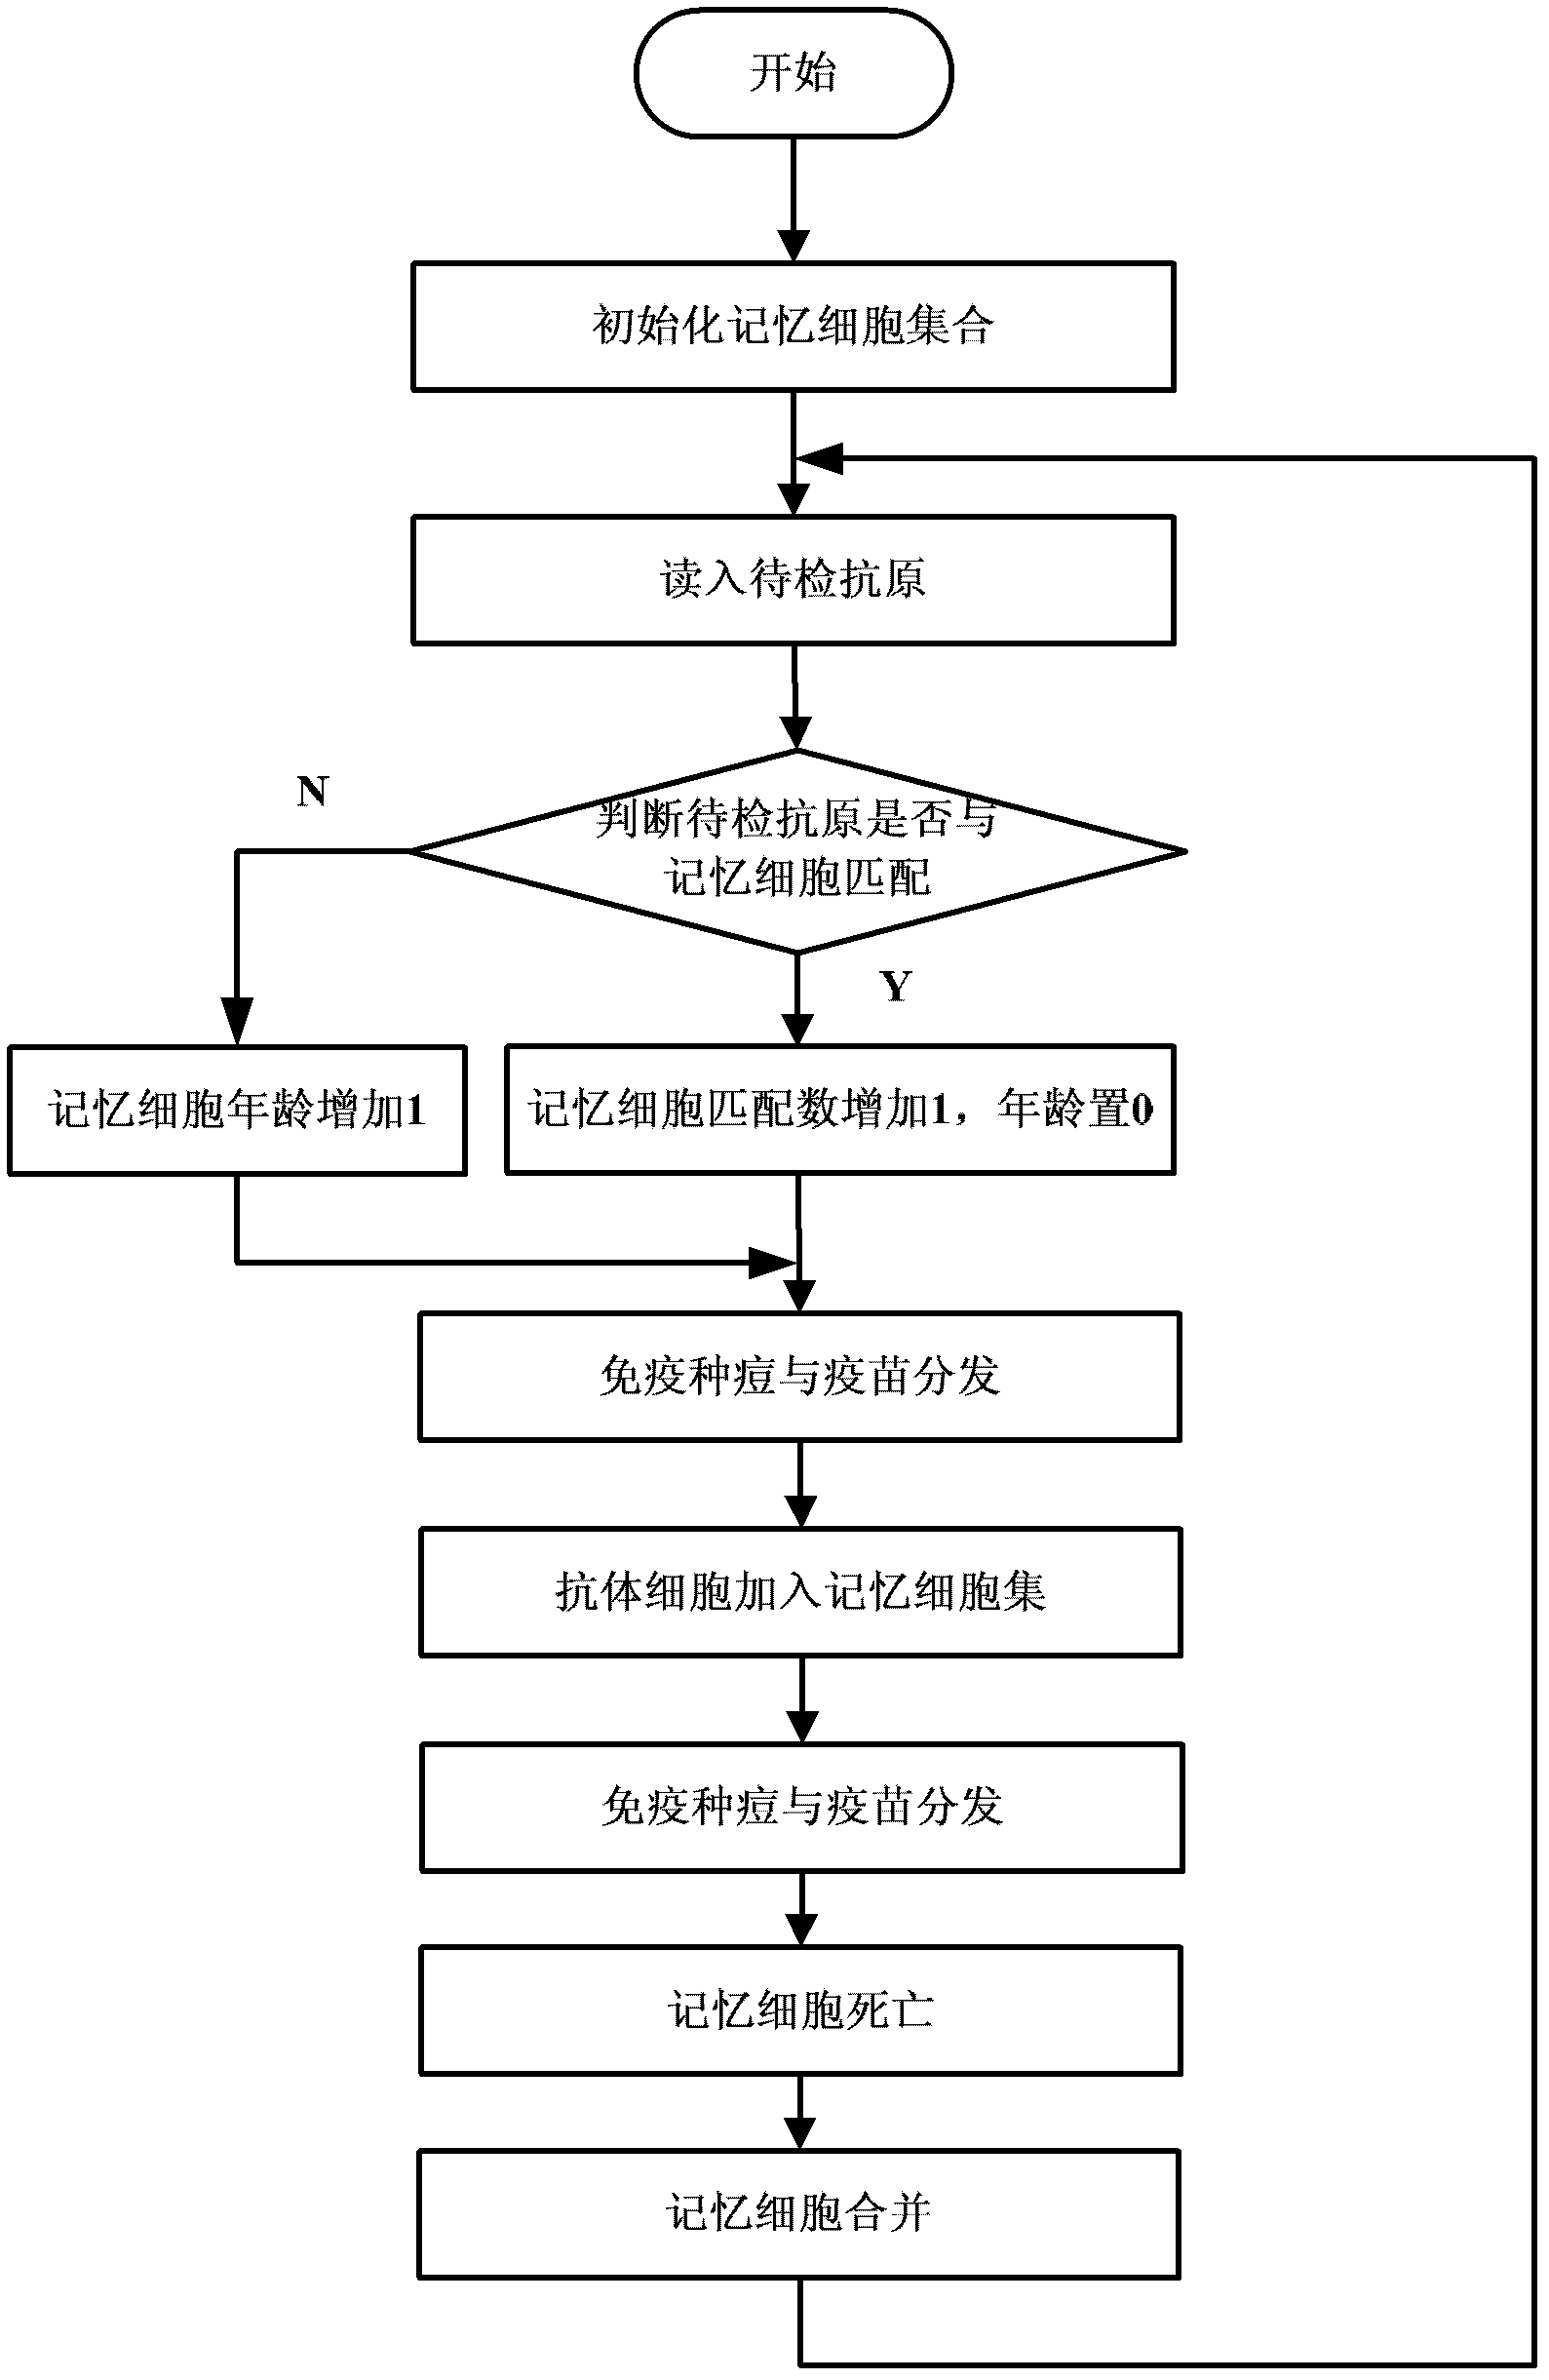 Method for dynamically detecting network anomaly in real time based on immunization